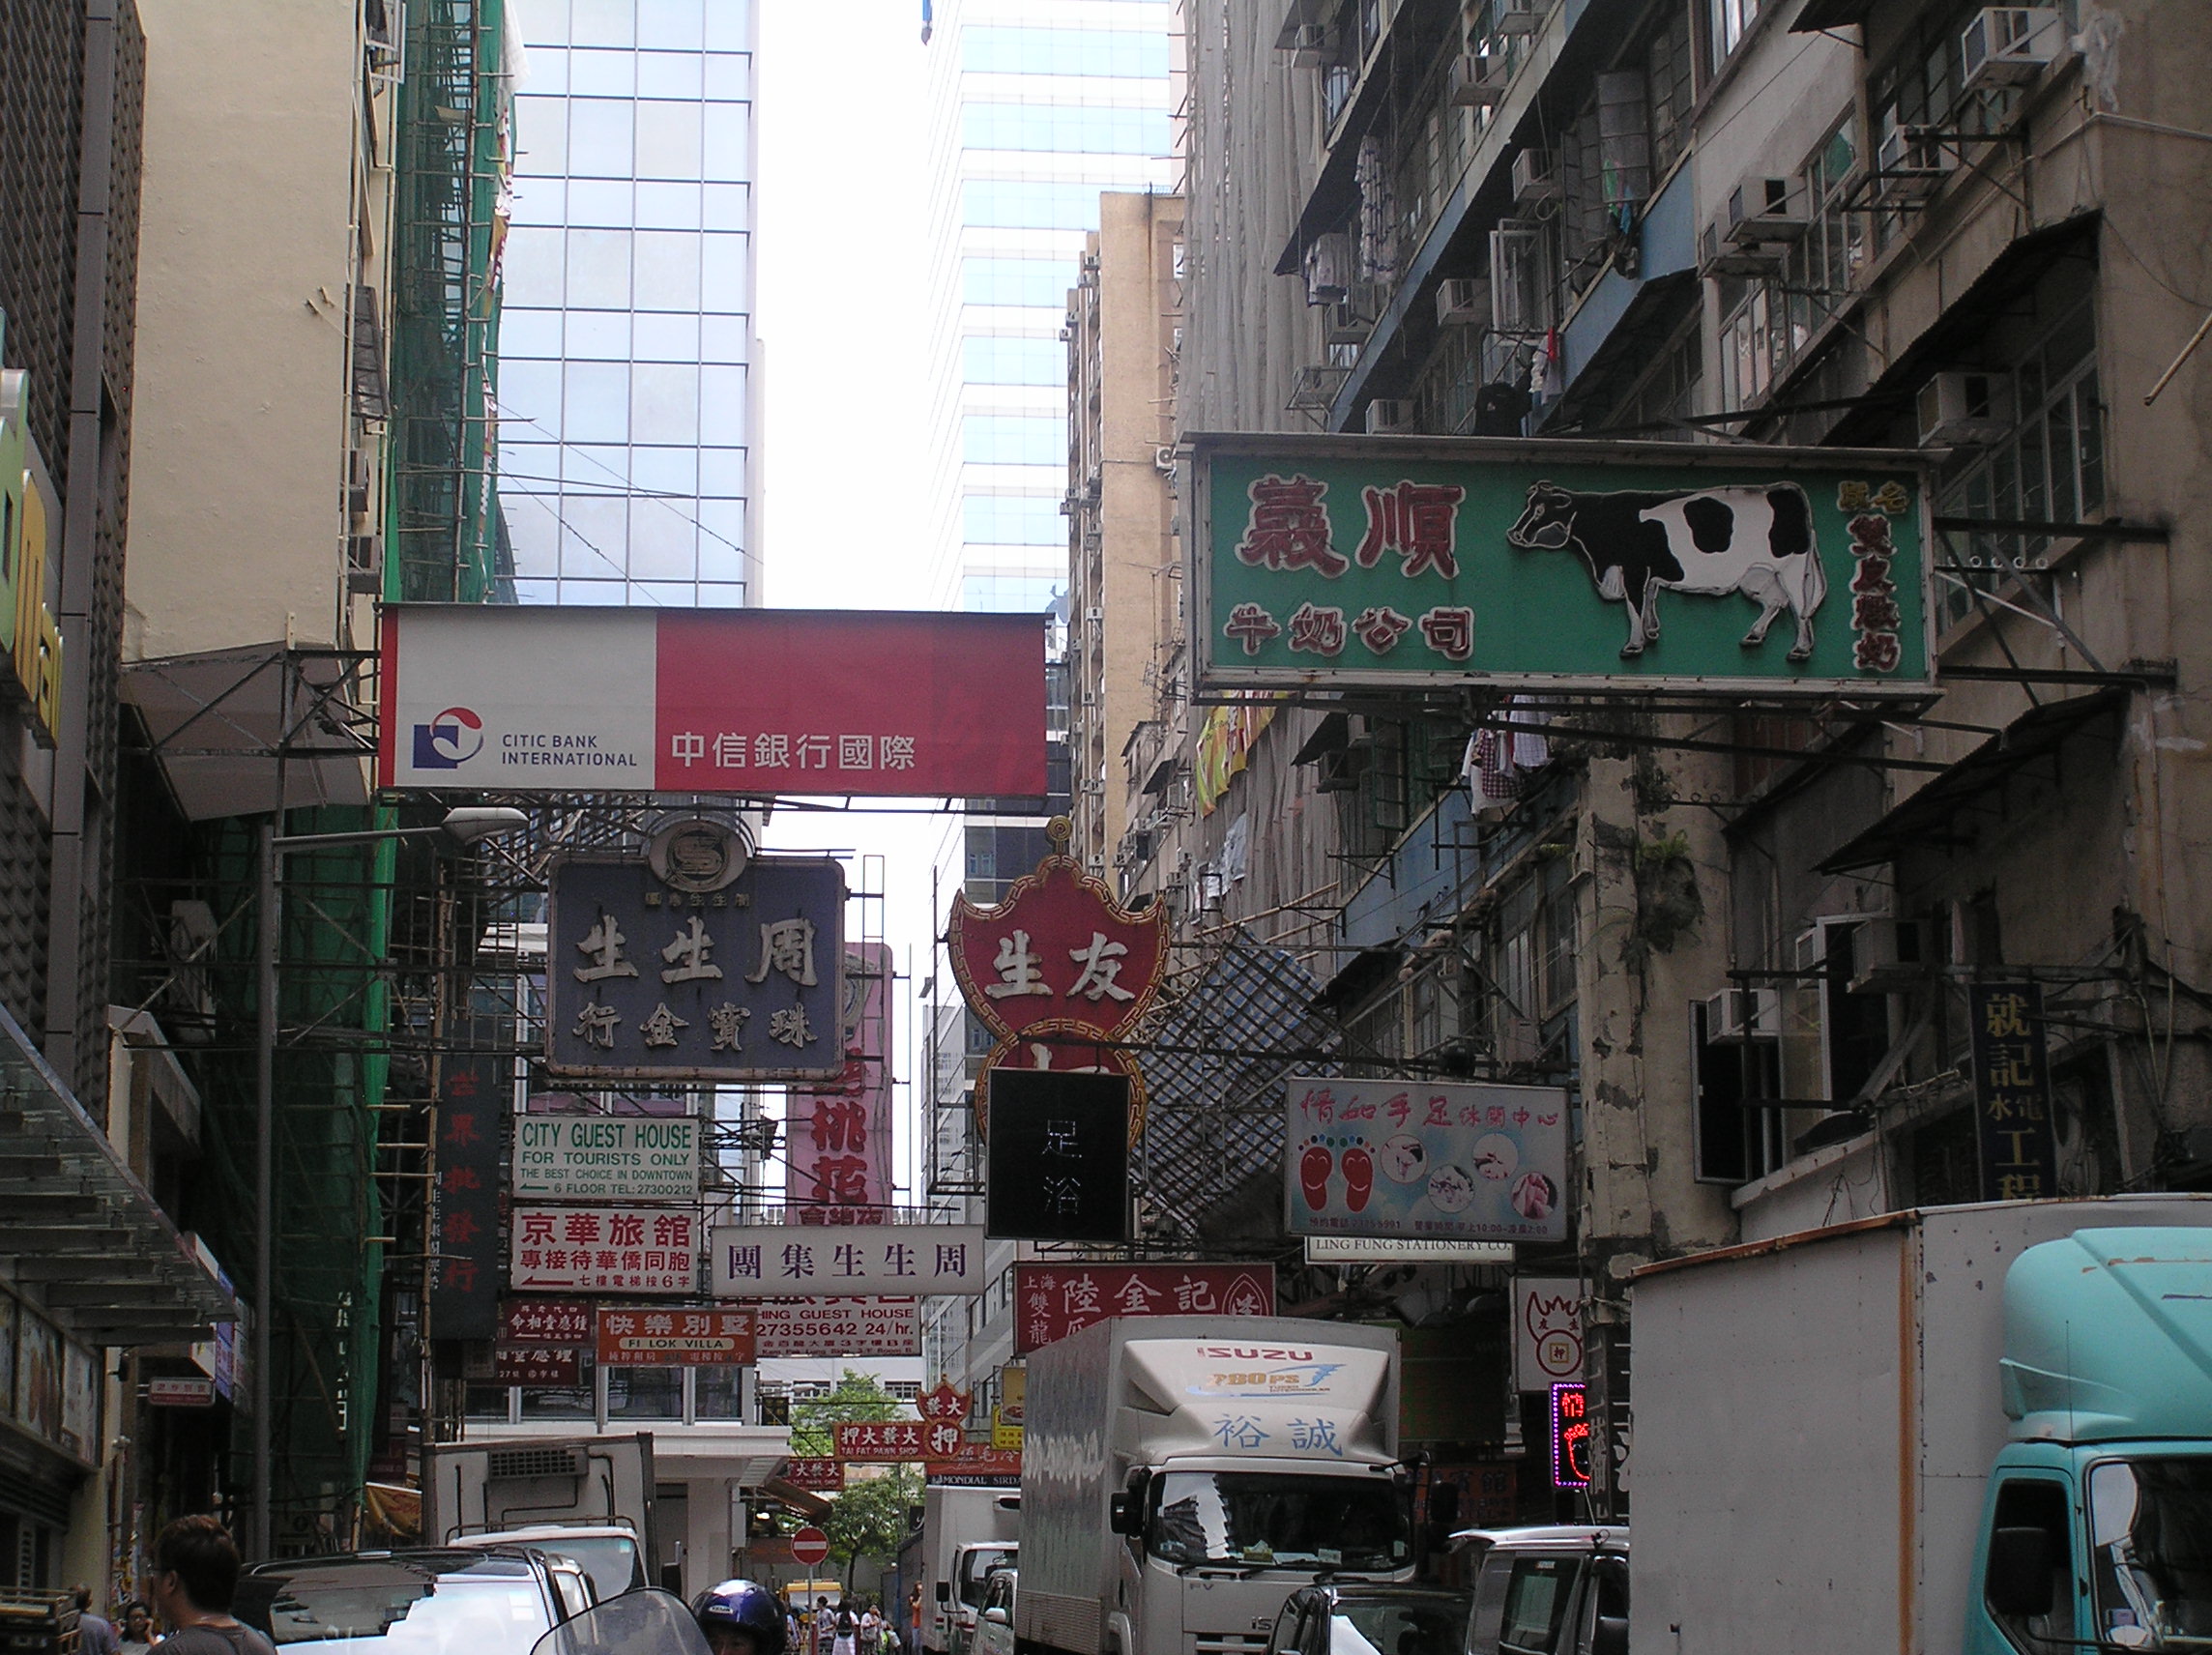 The Streets of Kowloon